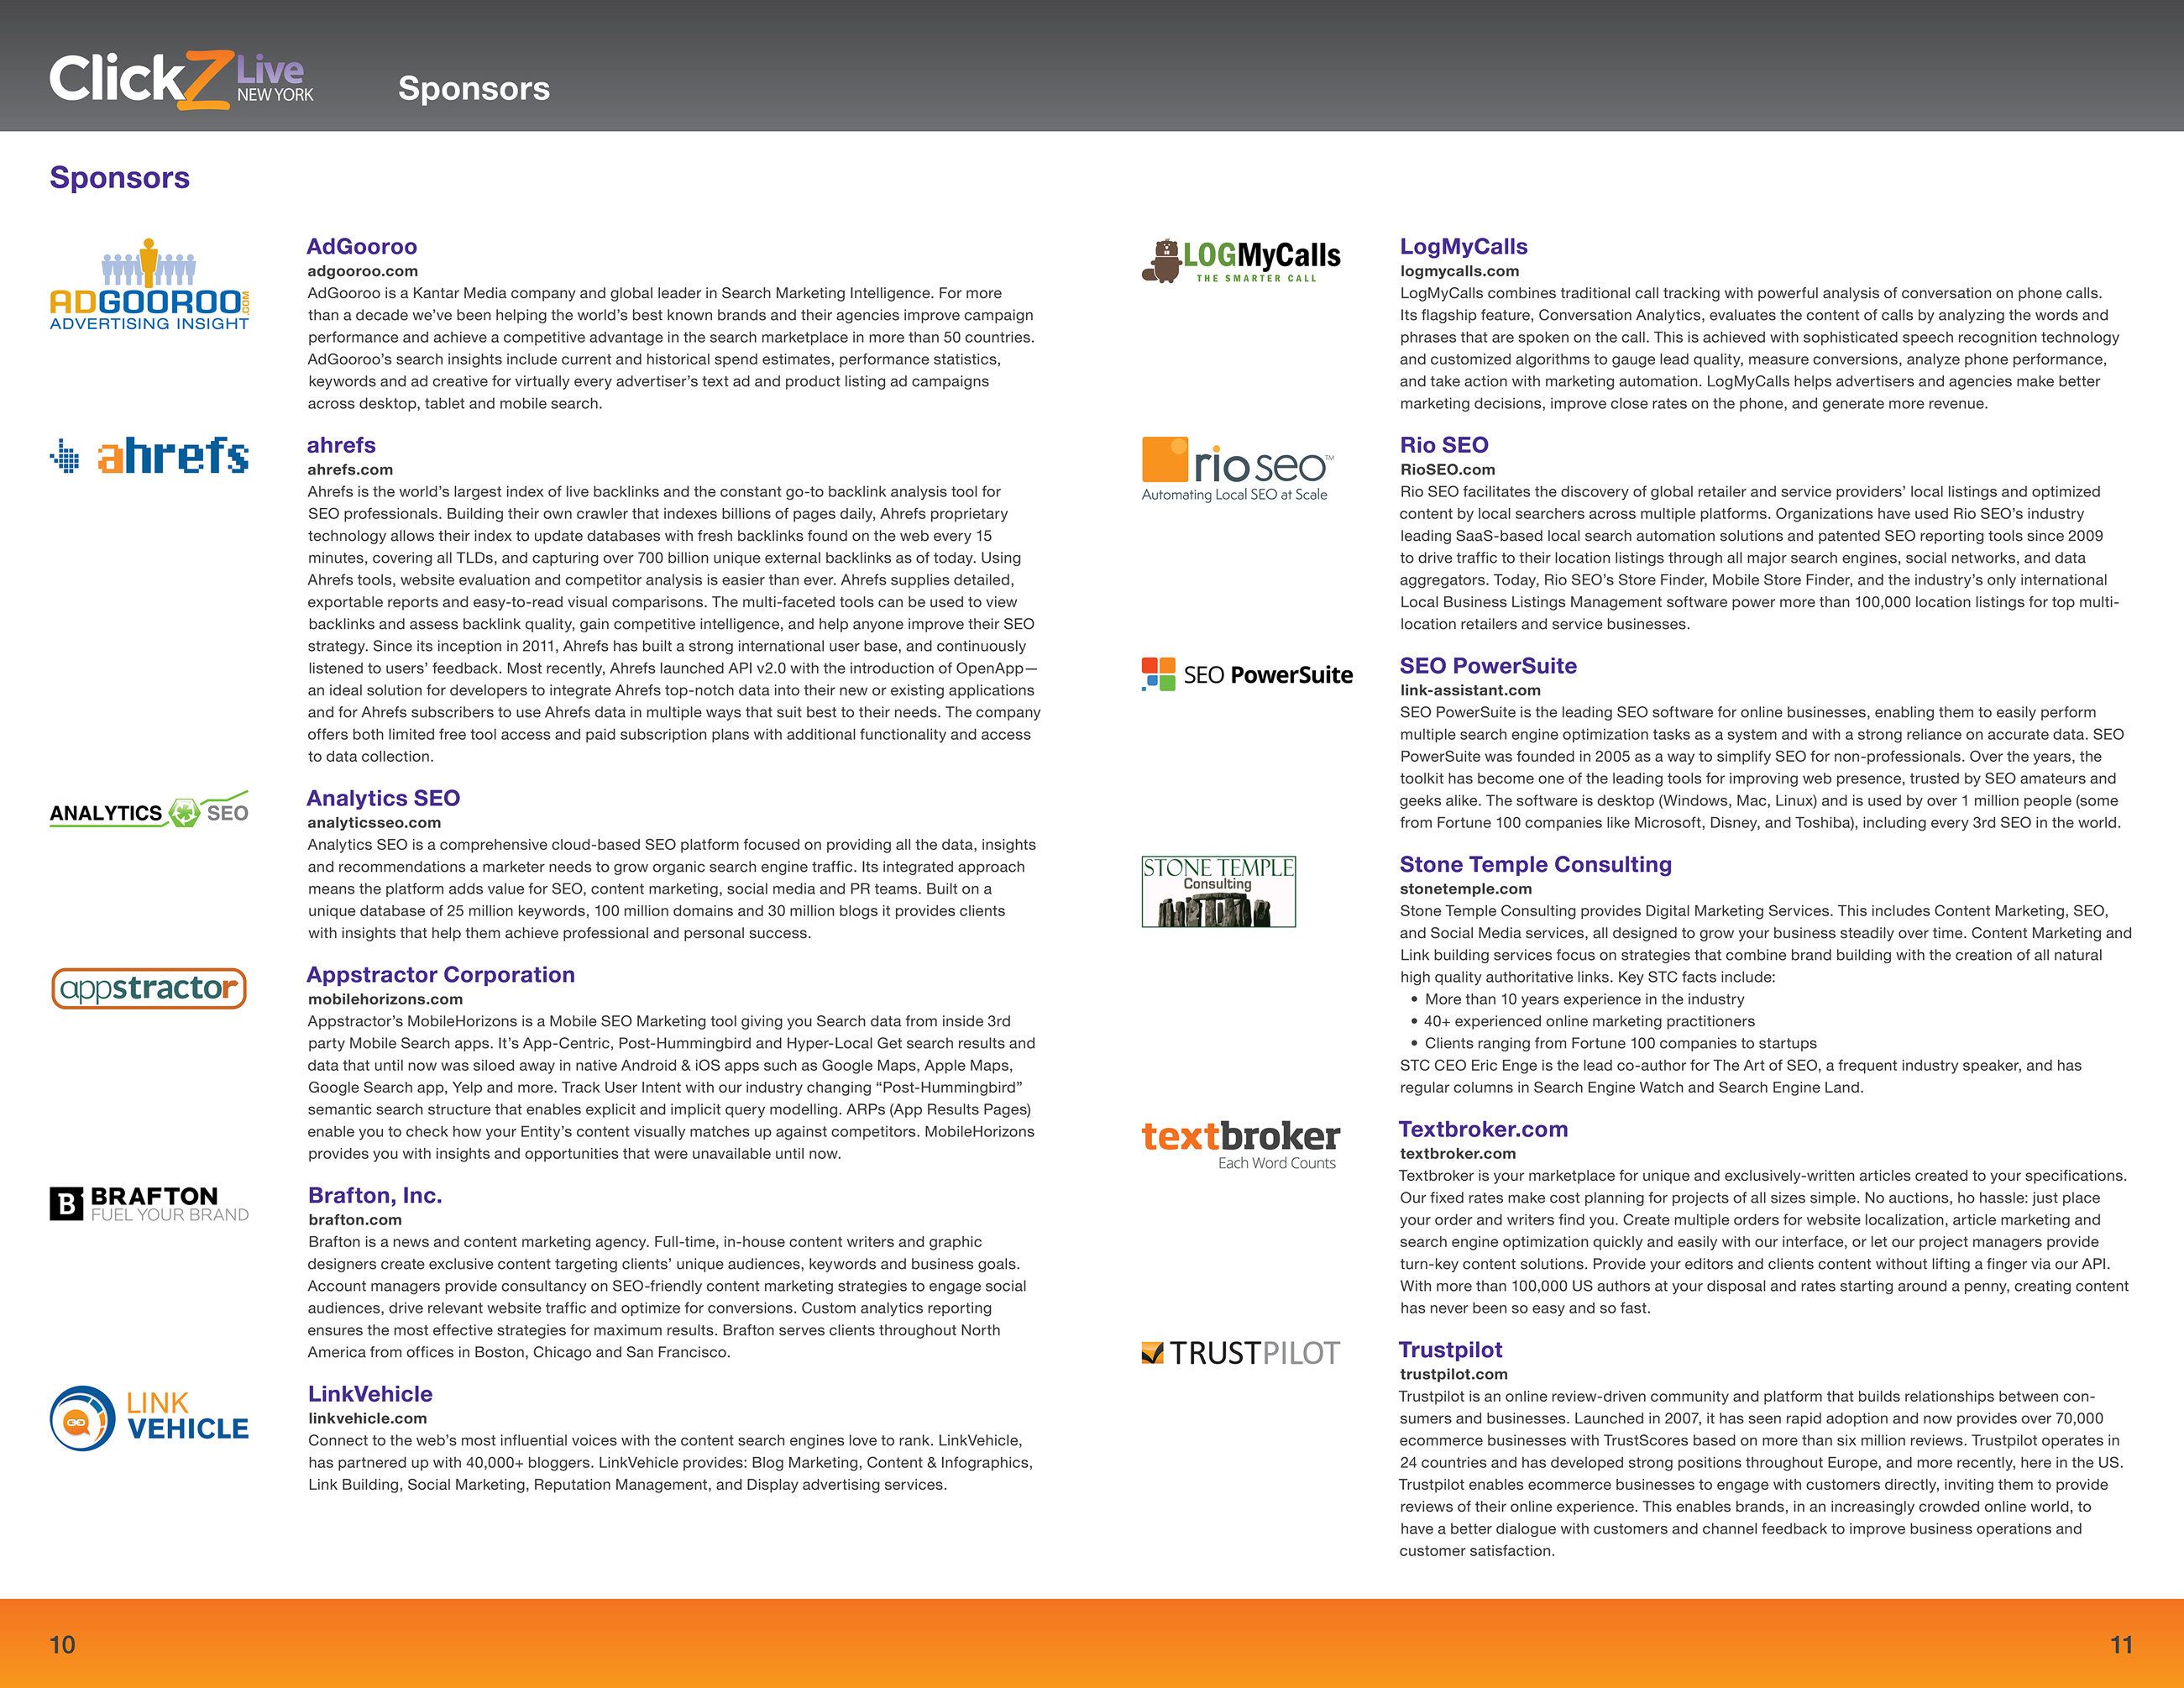 Spread from the conference guide for ClickZ Live New York. Shows descriptions and logos of sponsors.